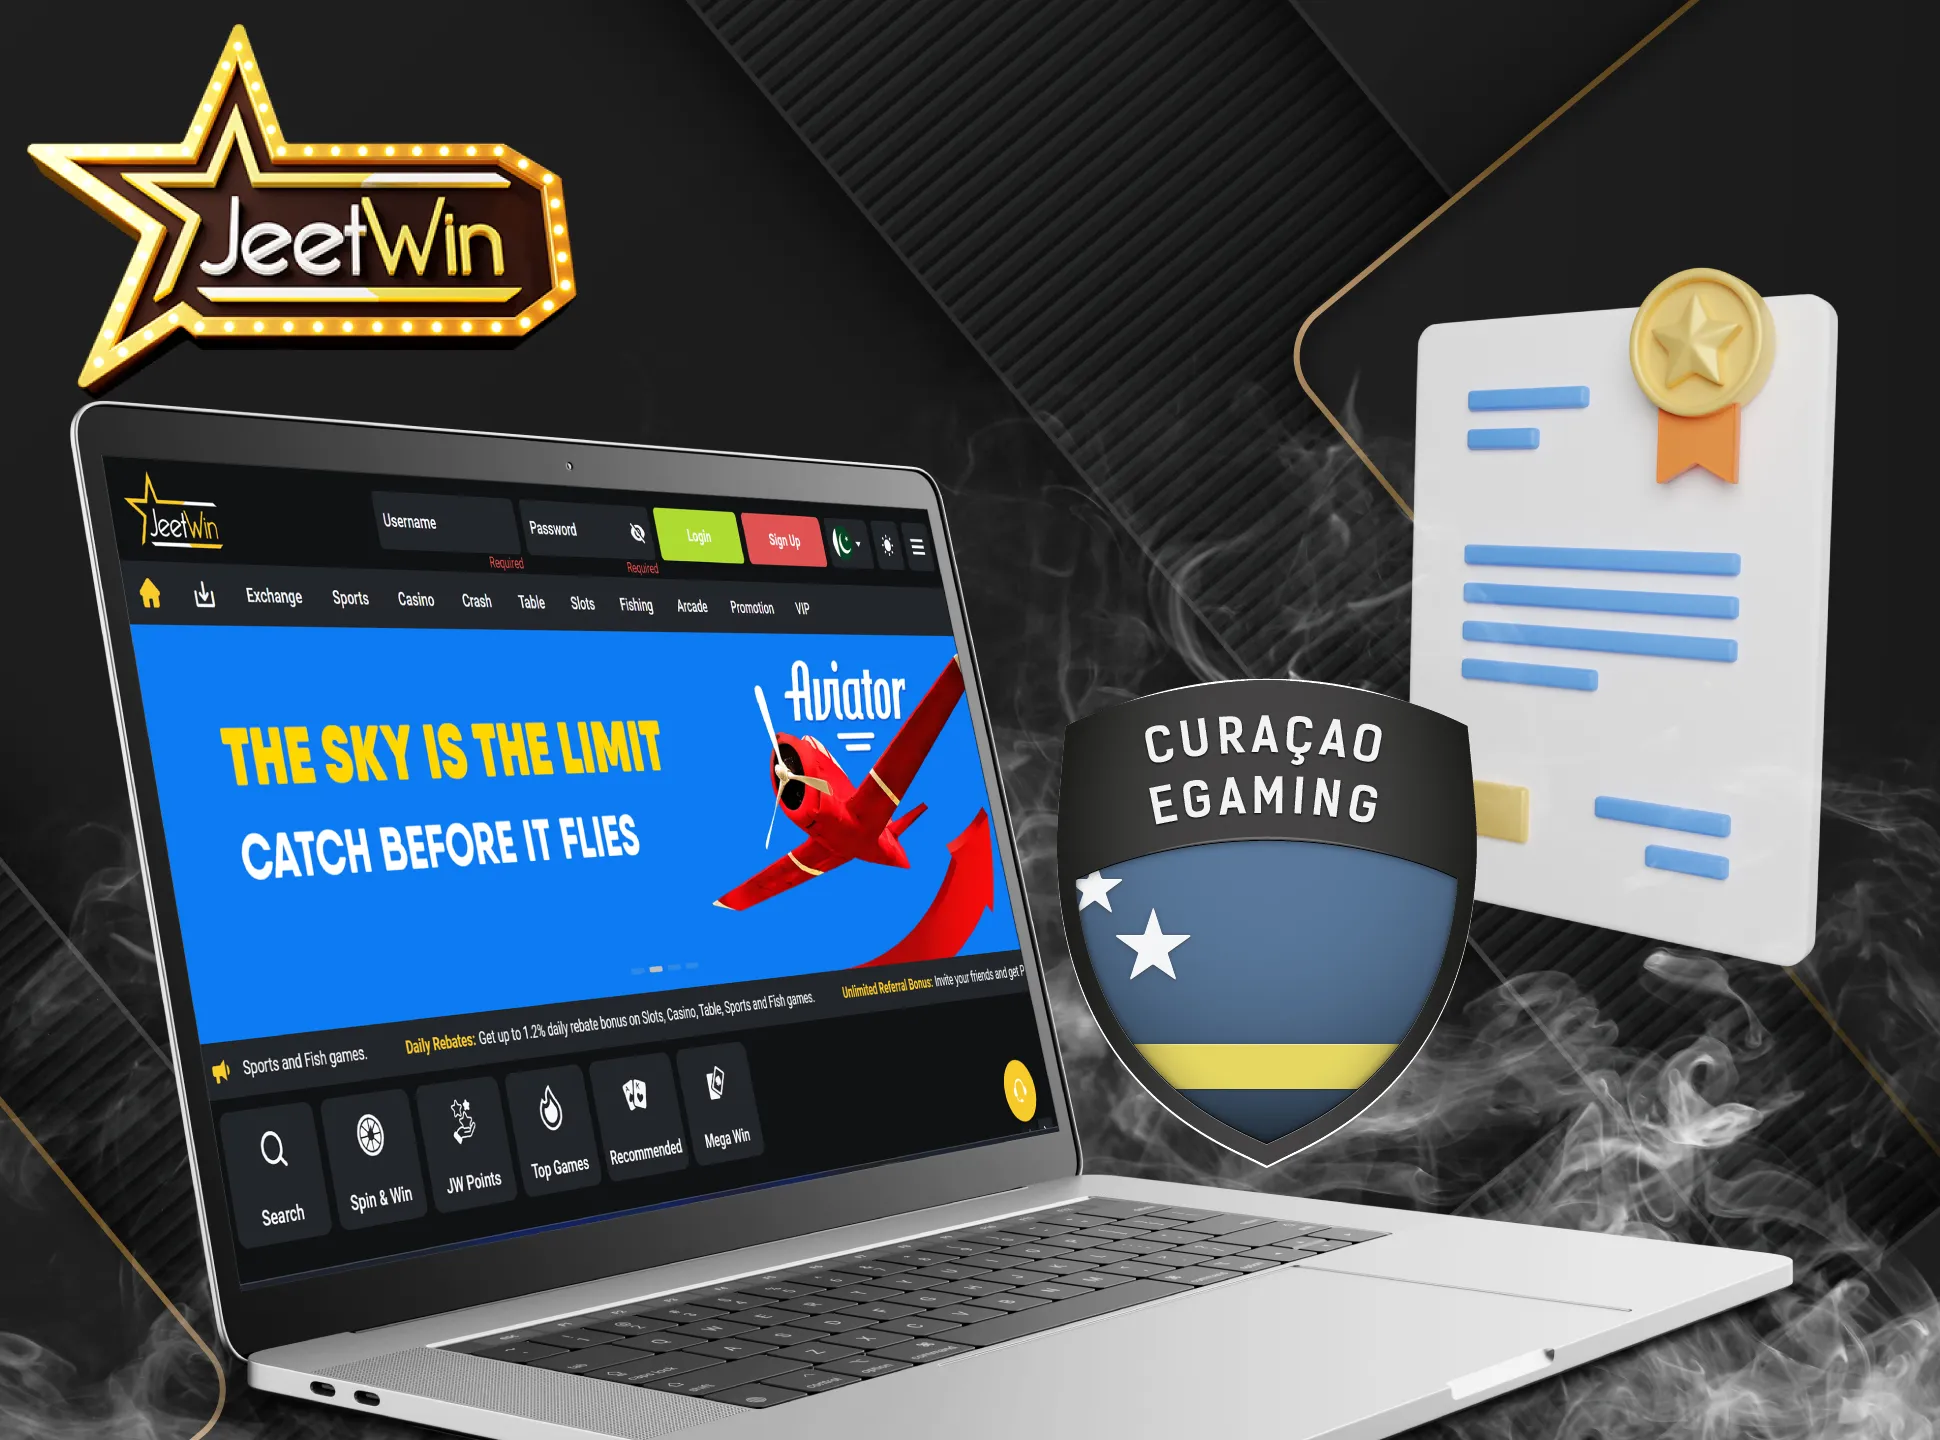 JeetWin is a licensed online casino that abides by and does not violate the laws of Pakistan.